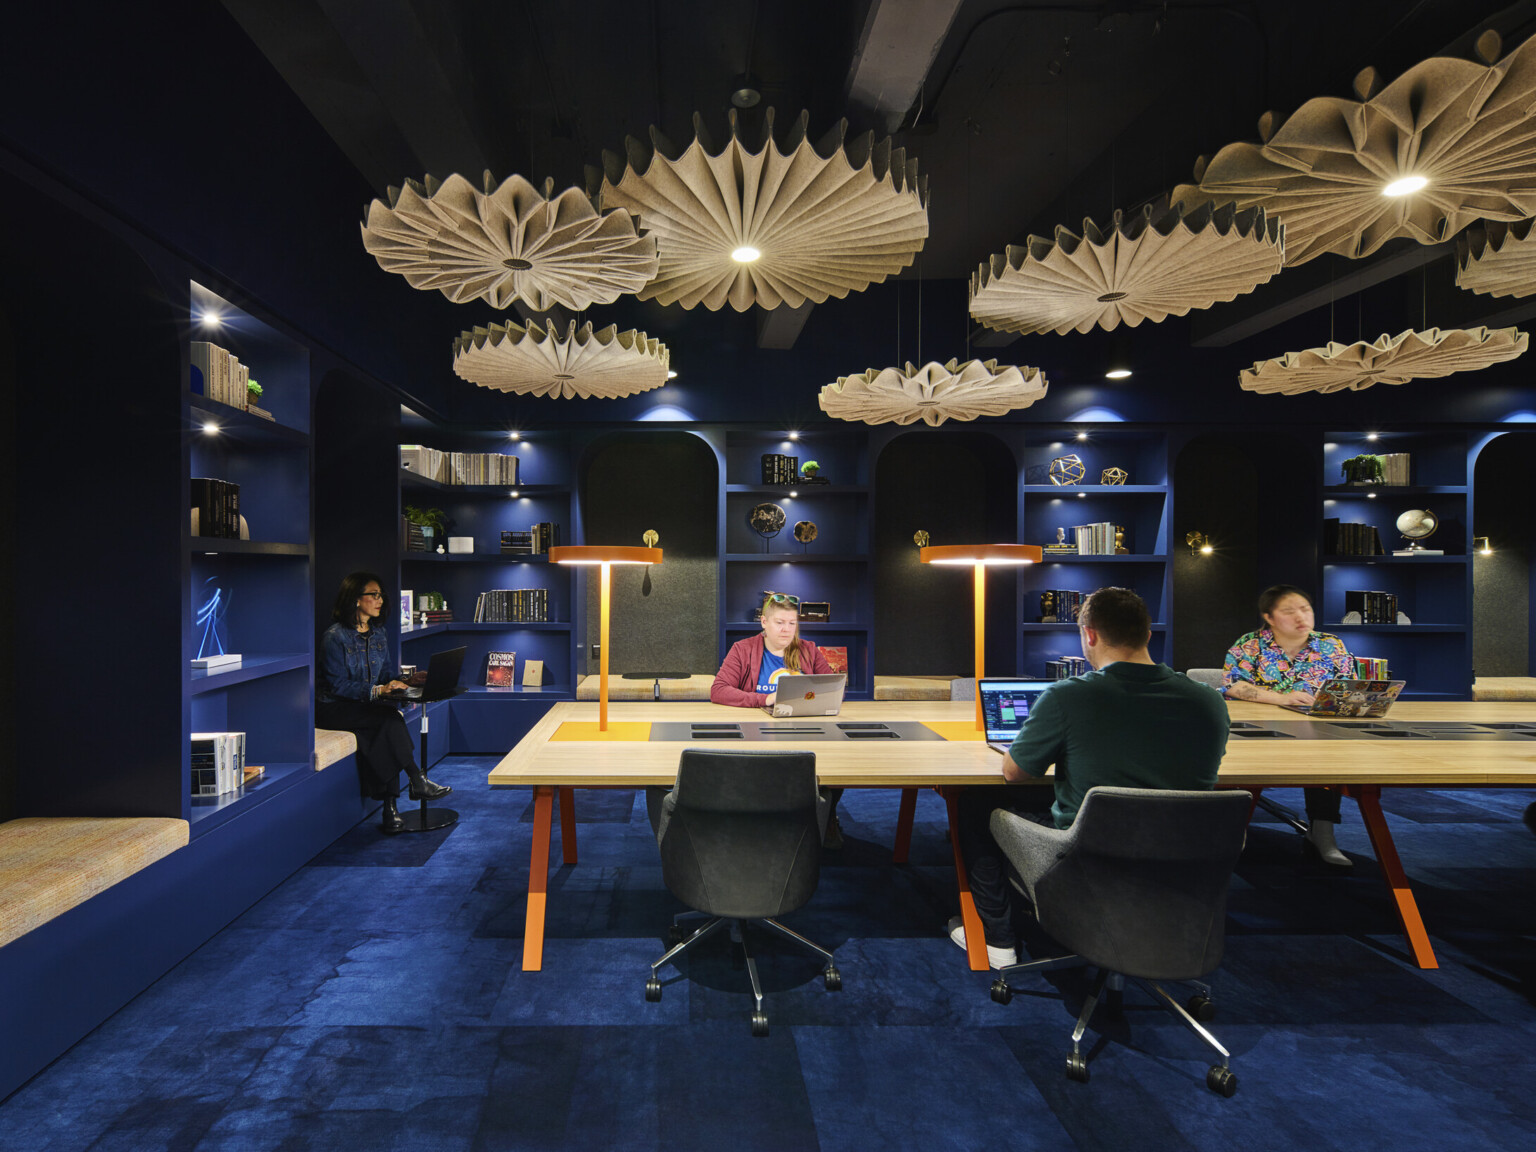 people working at a light wood table in a room with dark blue walls and ceilings, dark blue carpet and light wood chandeliers